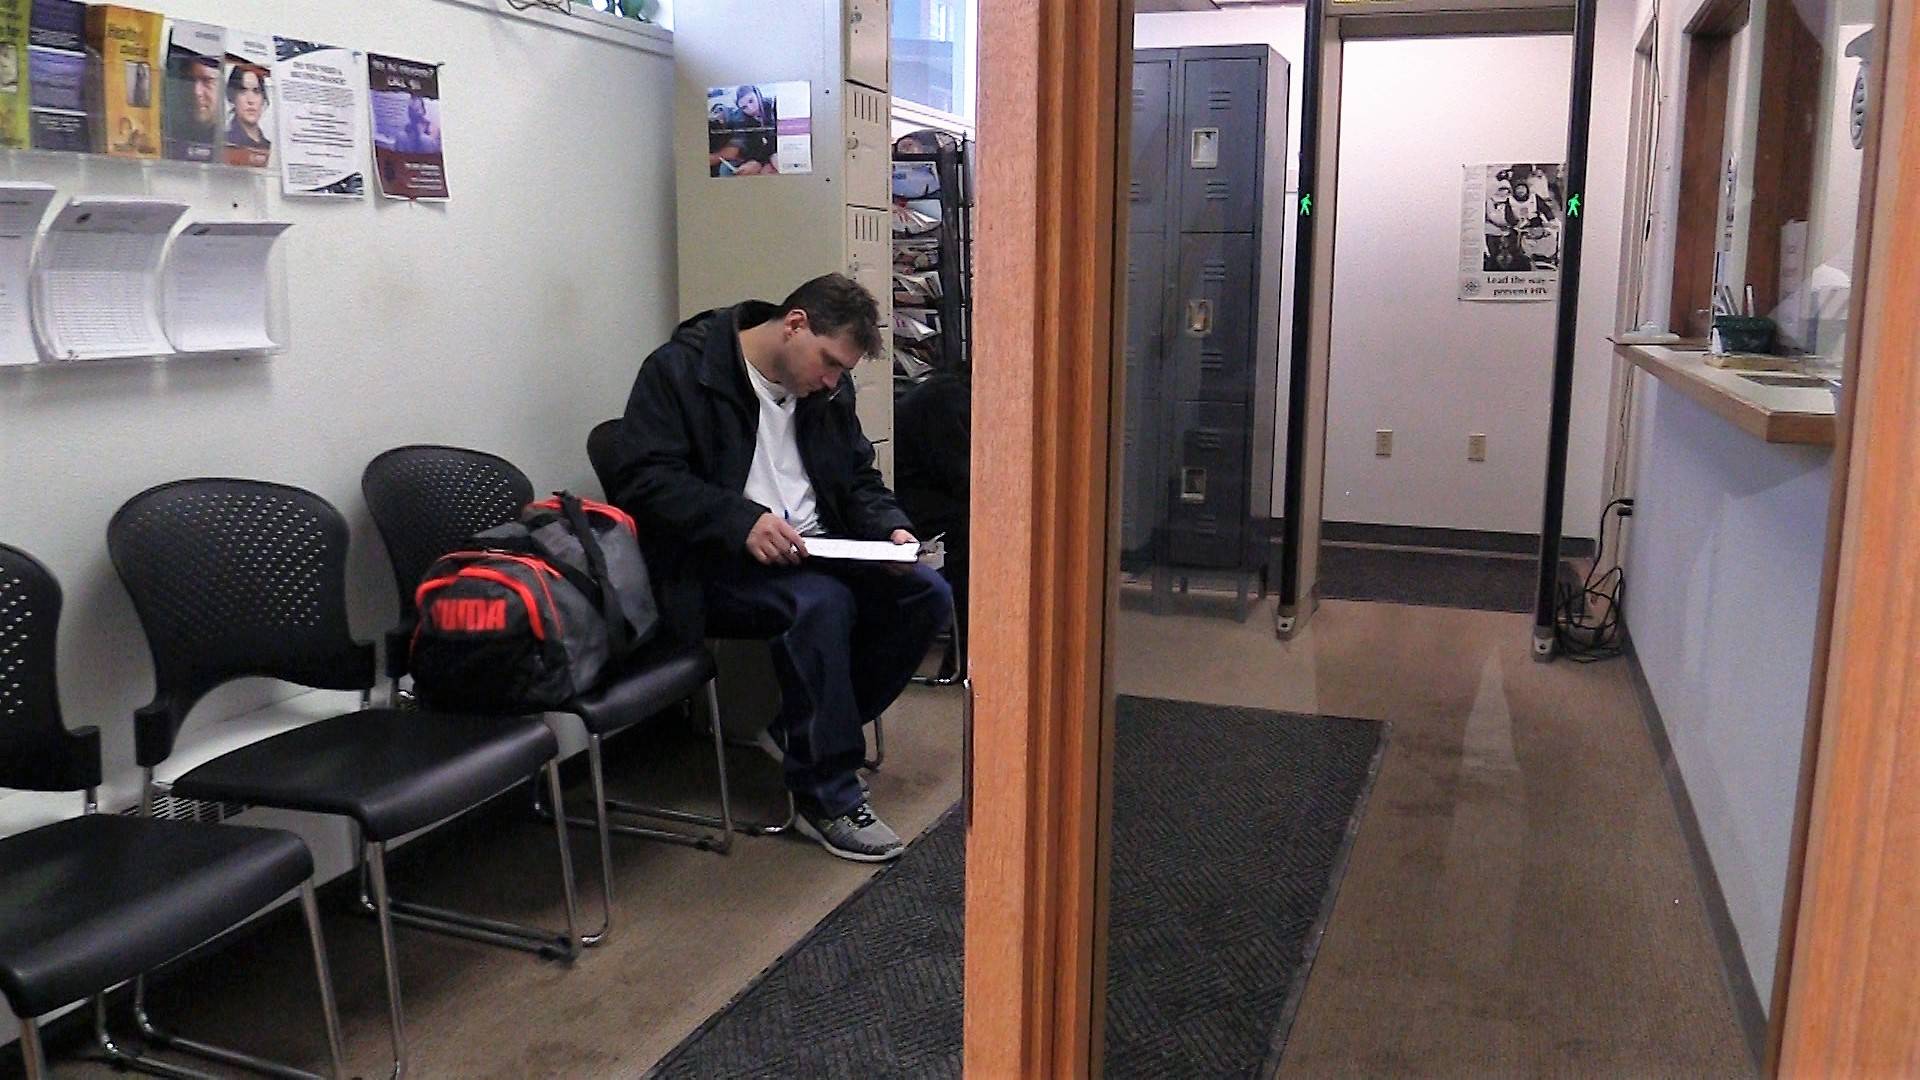 Chawn Summerall studies his paperwork at the probation department in downtown Juneau after his release from prison. (Photo courtesy of 360 North)